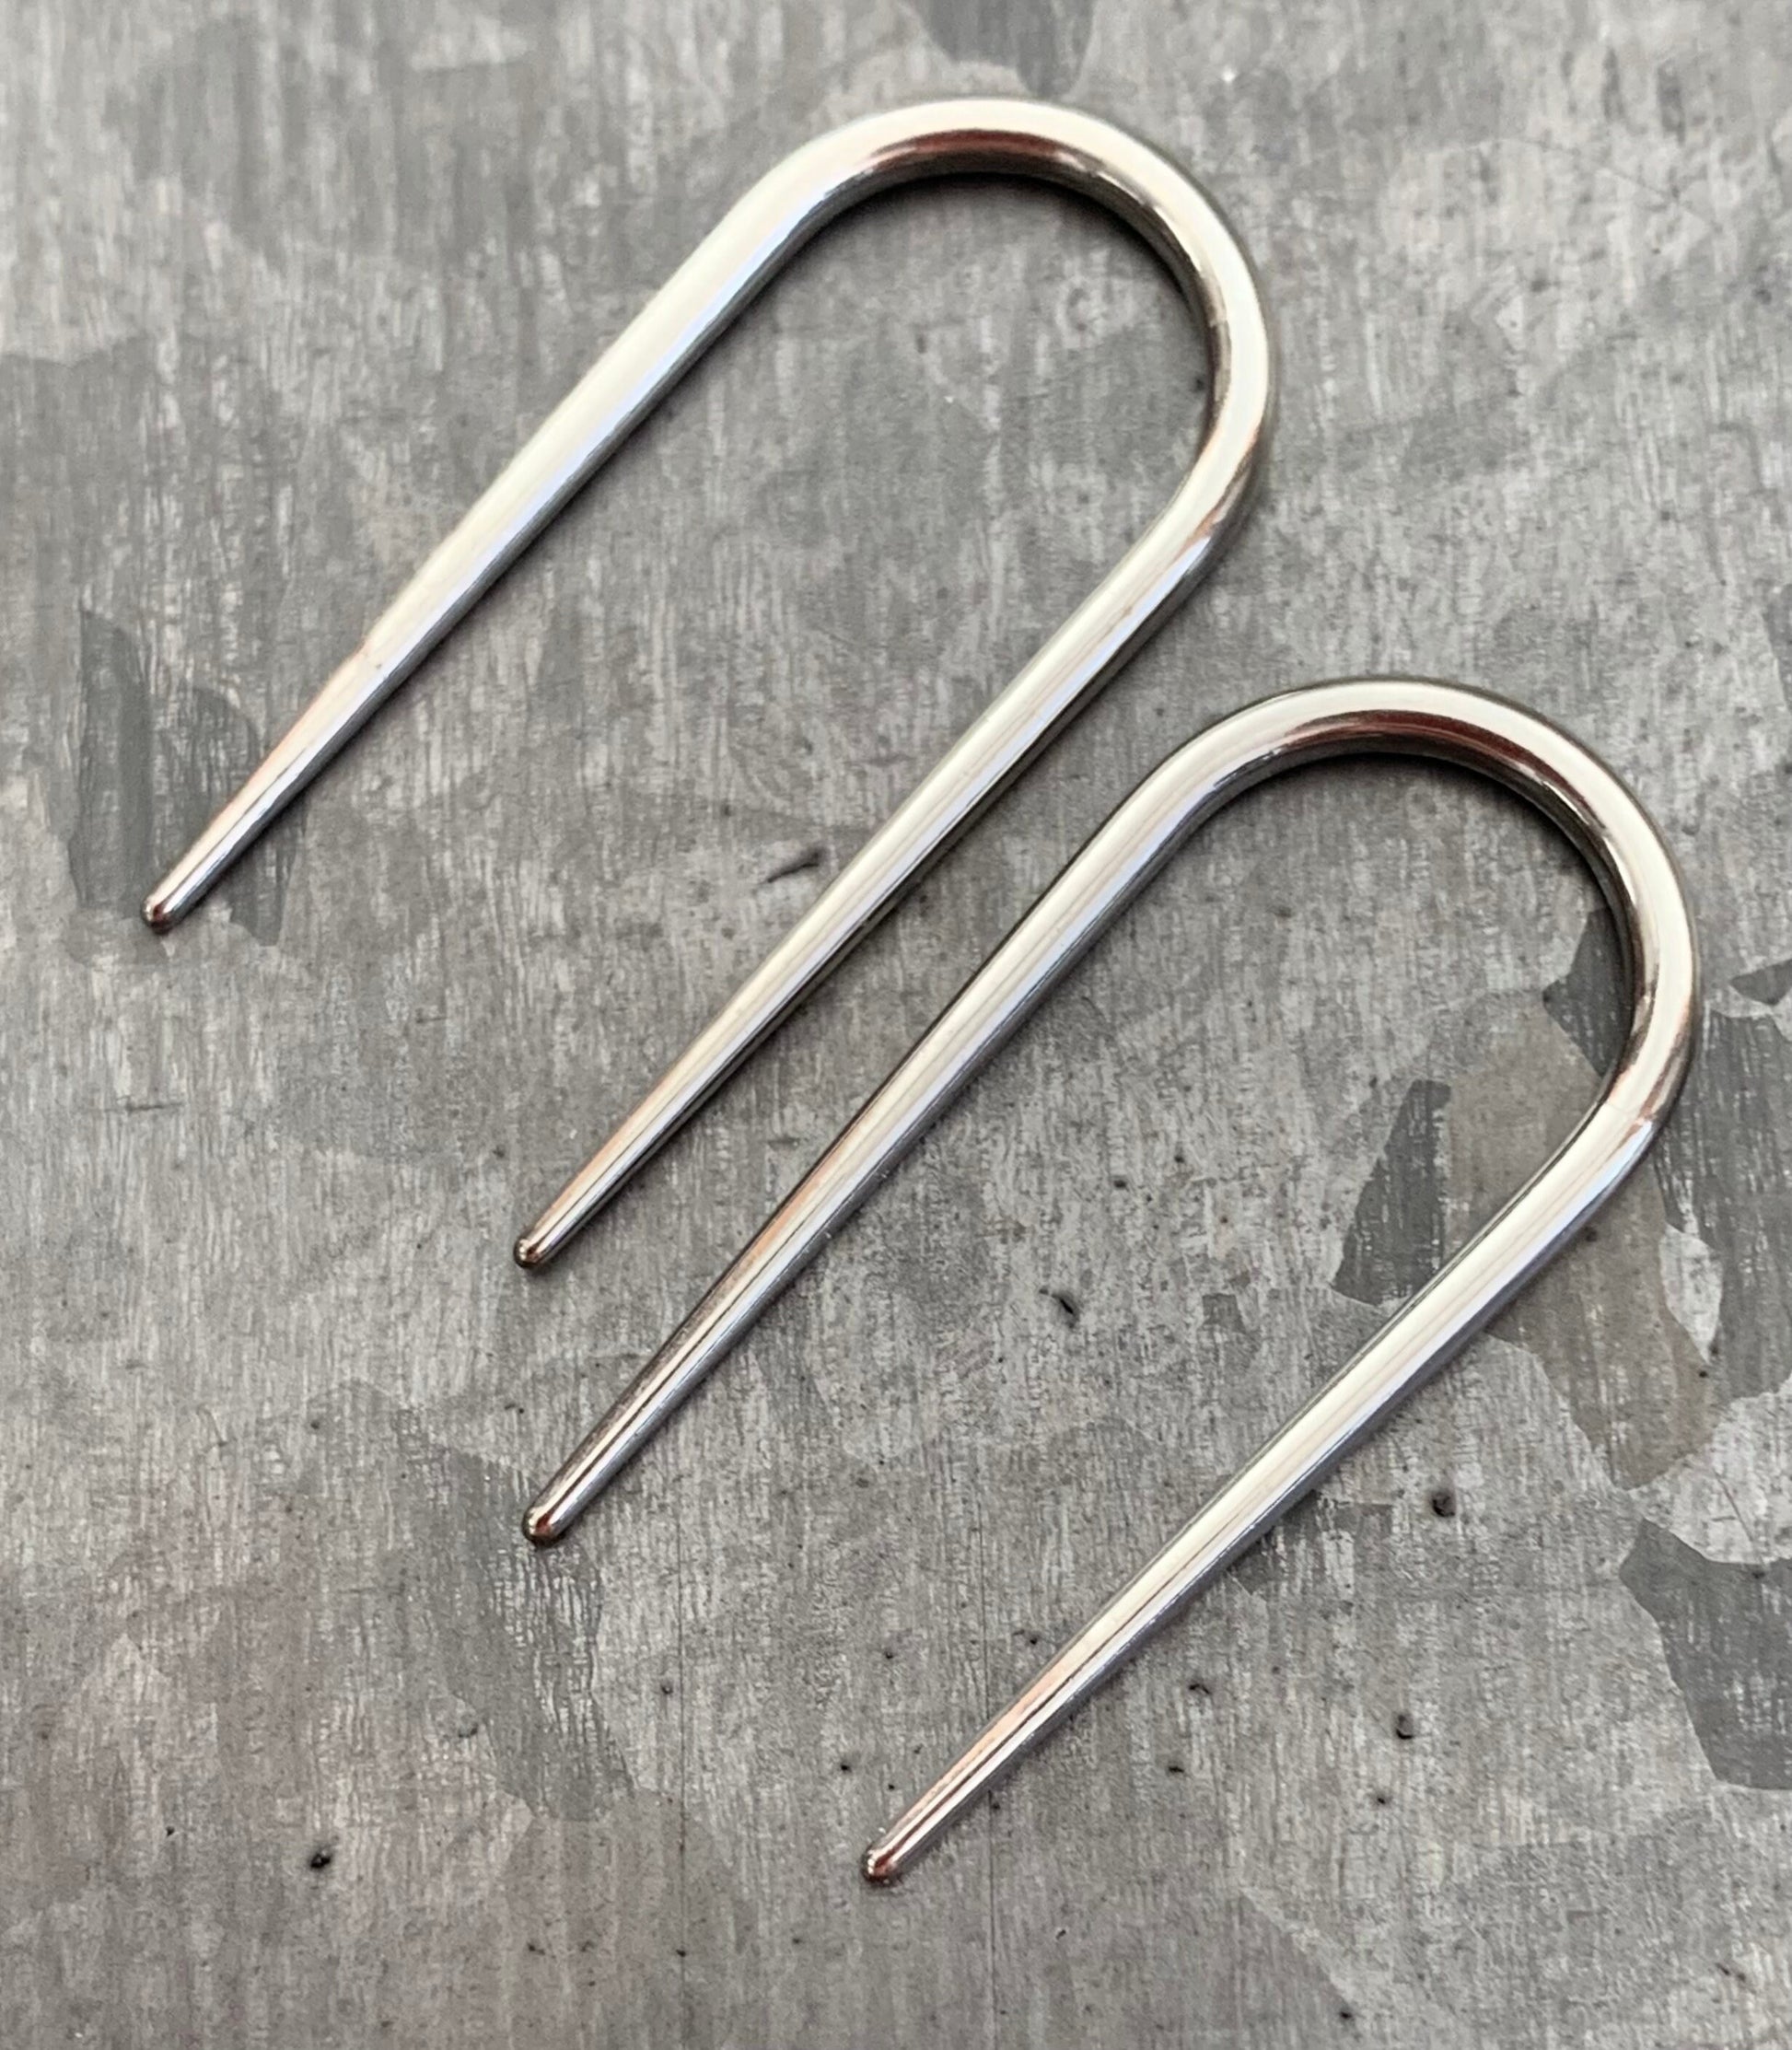 PAIR of Unique Surgical Steel U-Shaped Tapers Plugs - Gauges 14g (1.6mm) thru 10g (2.5mm) available!